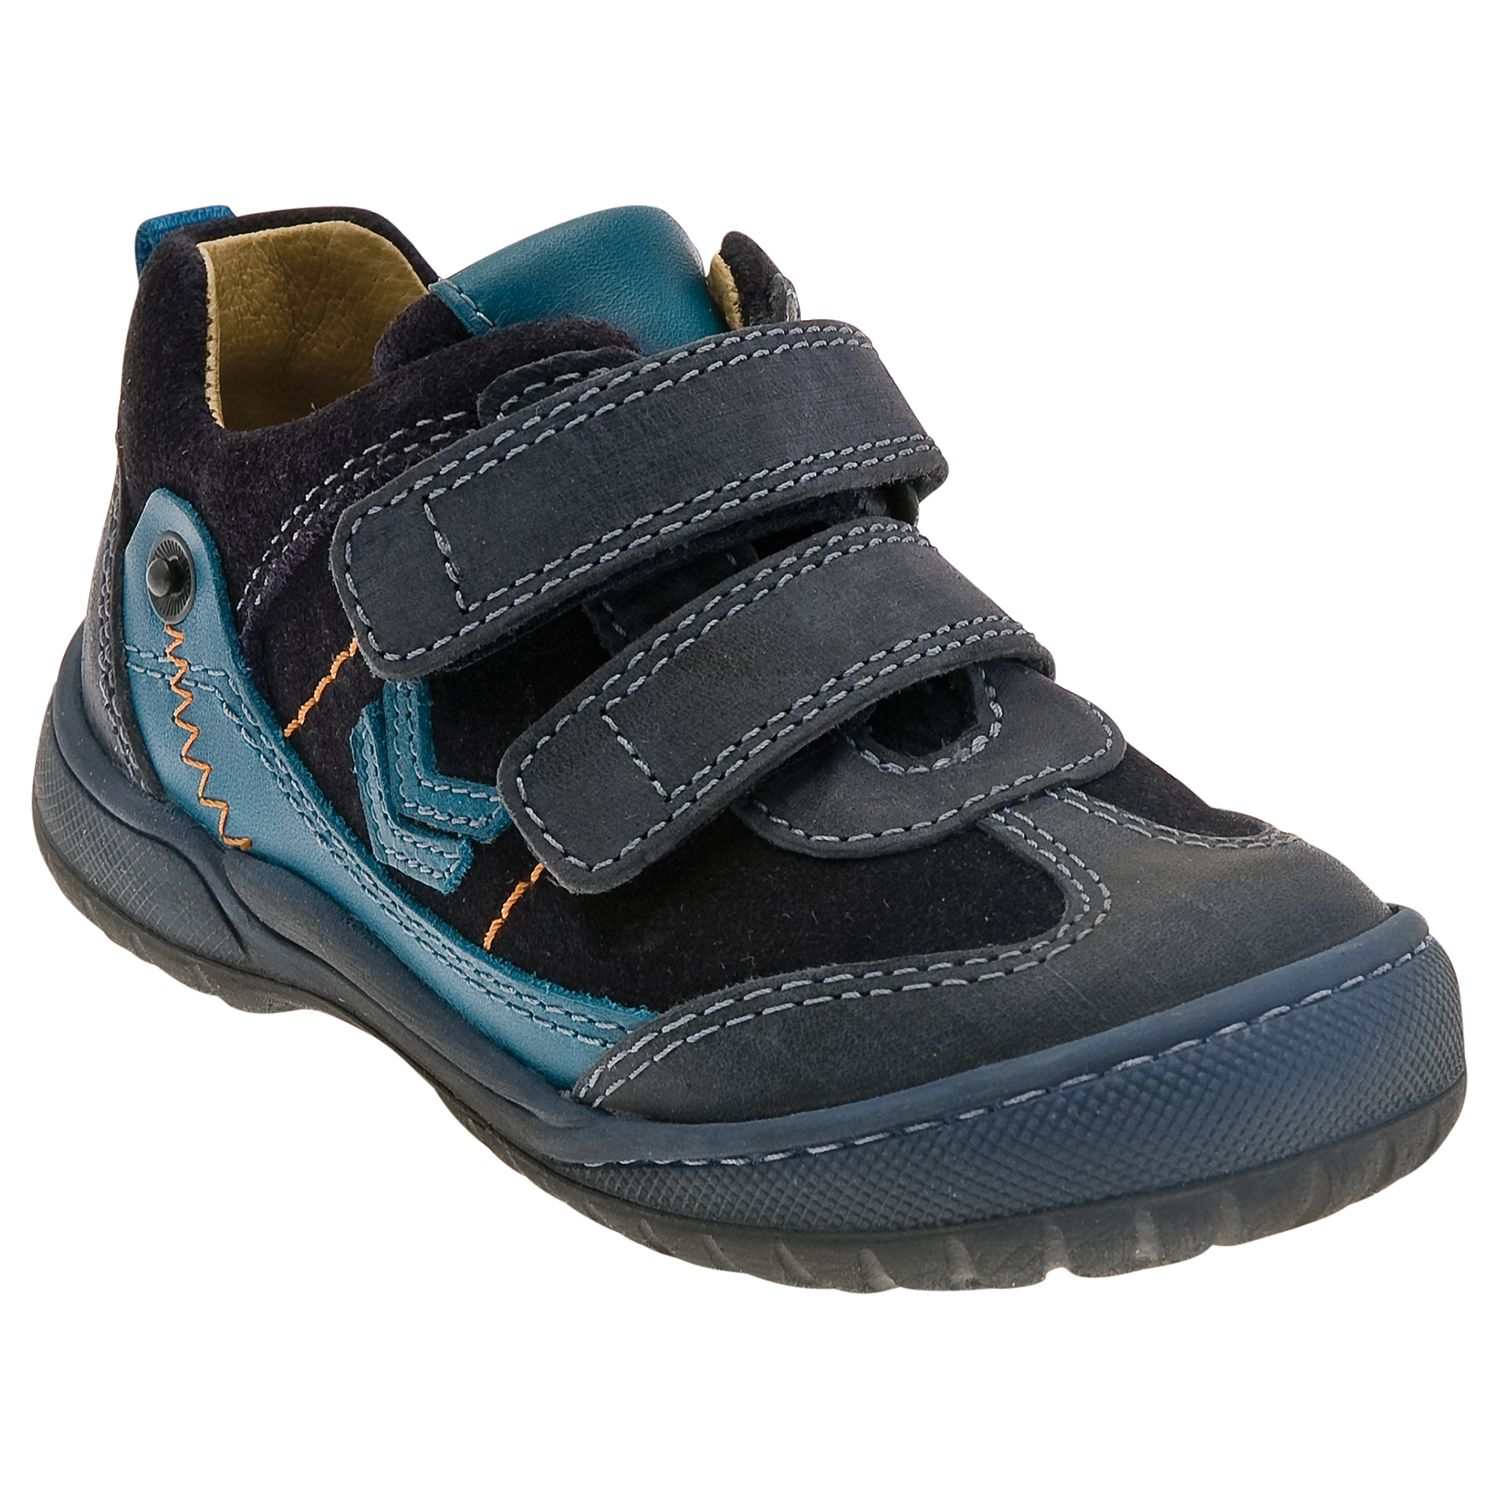 Start-rite Trail Shoes, Navy